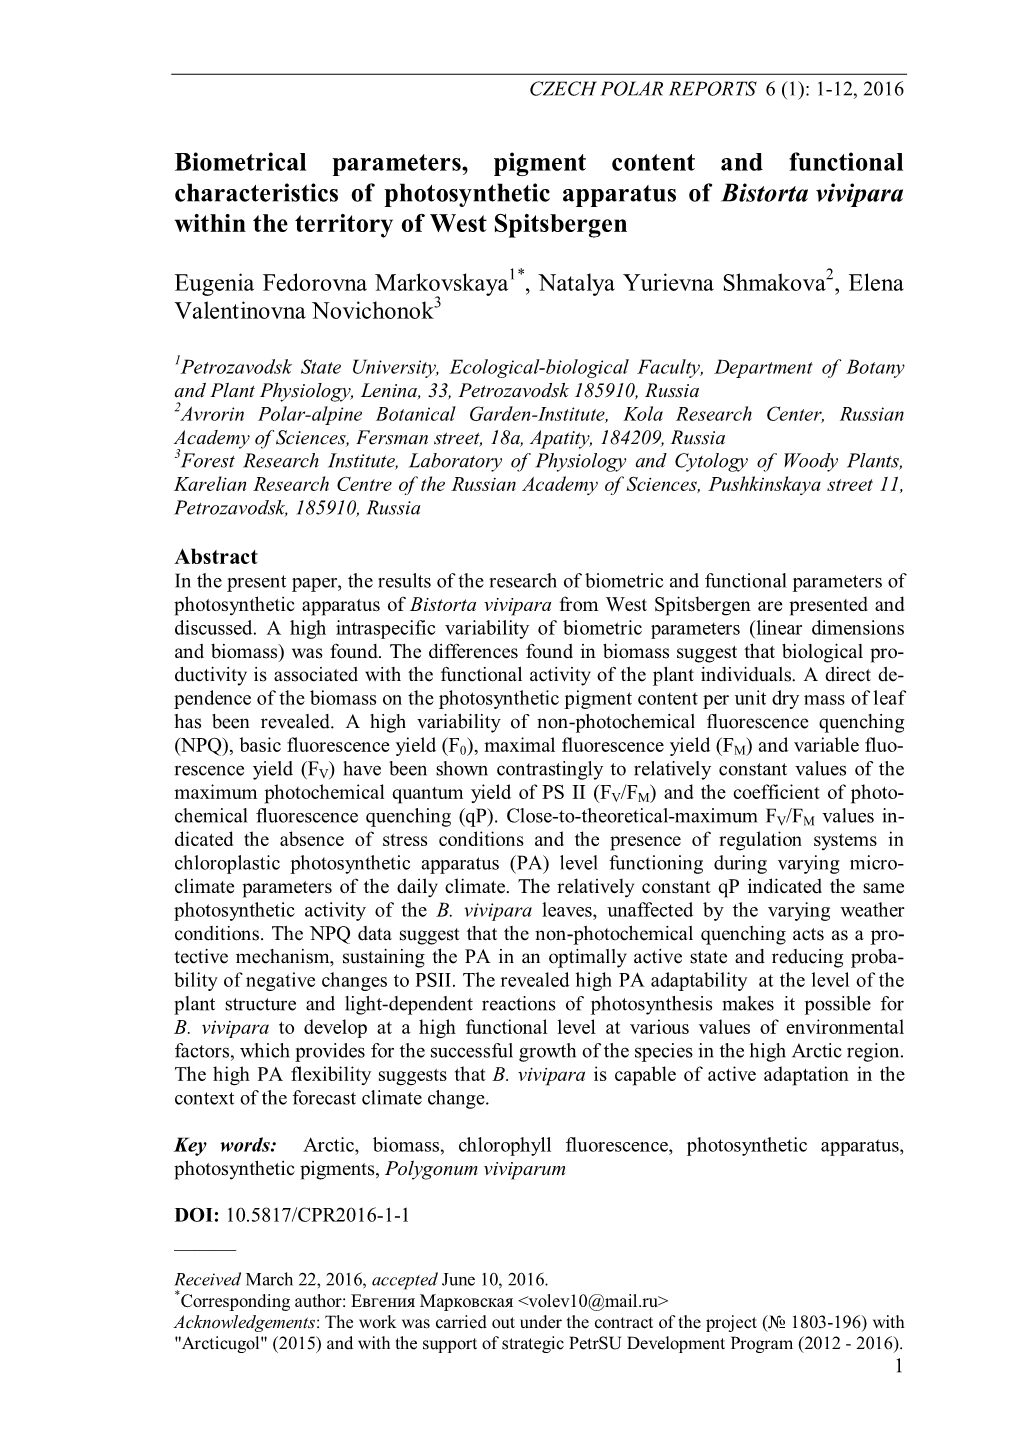 Biometrical Parameters, Pigment Content and Functional Characteristics of Photosynthetic Apparatus of Bistorta Vivipara Within the Territory of West Spitsbergen